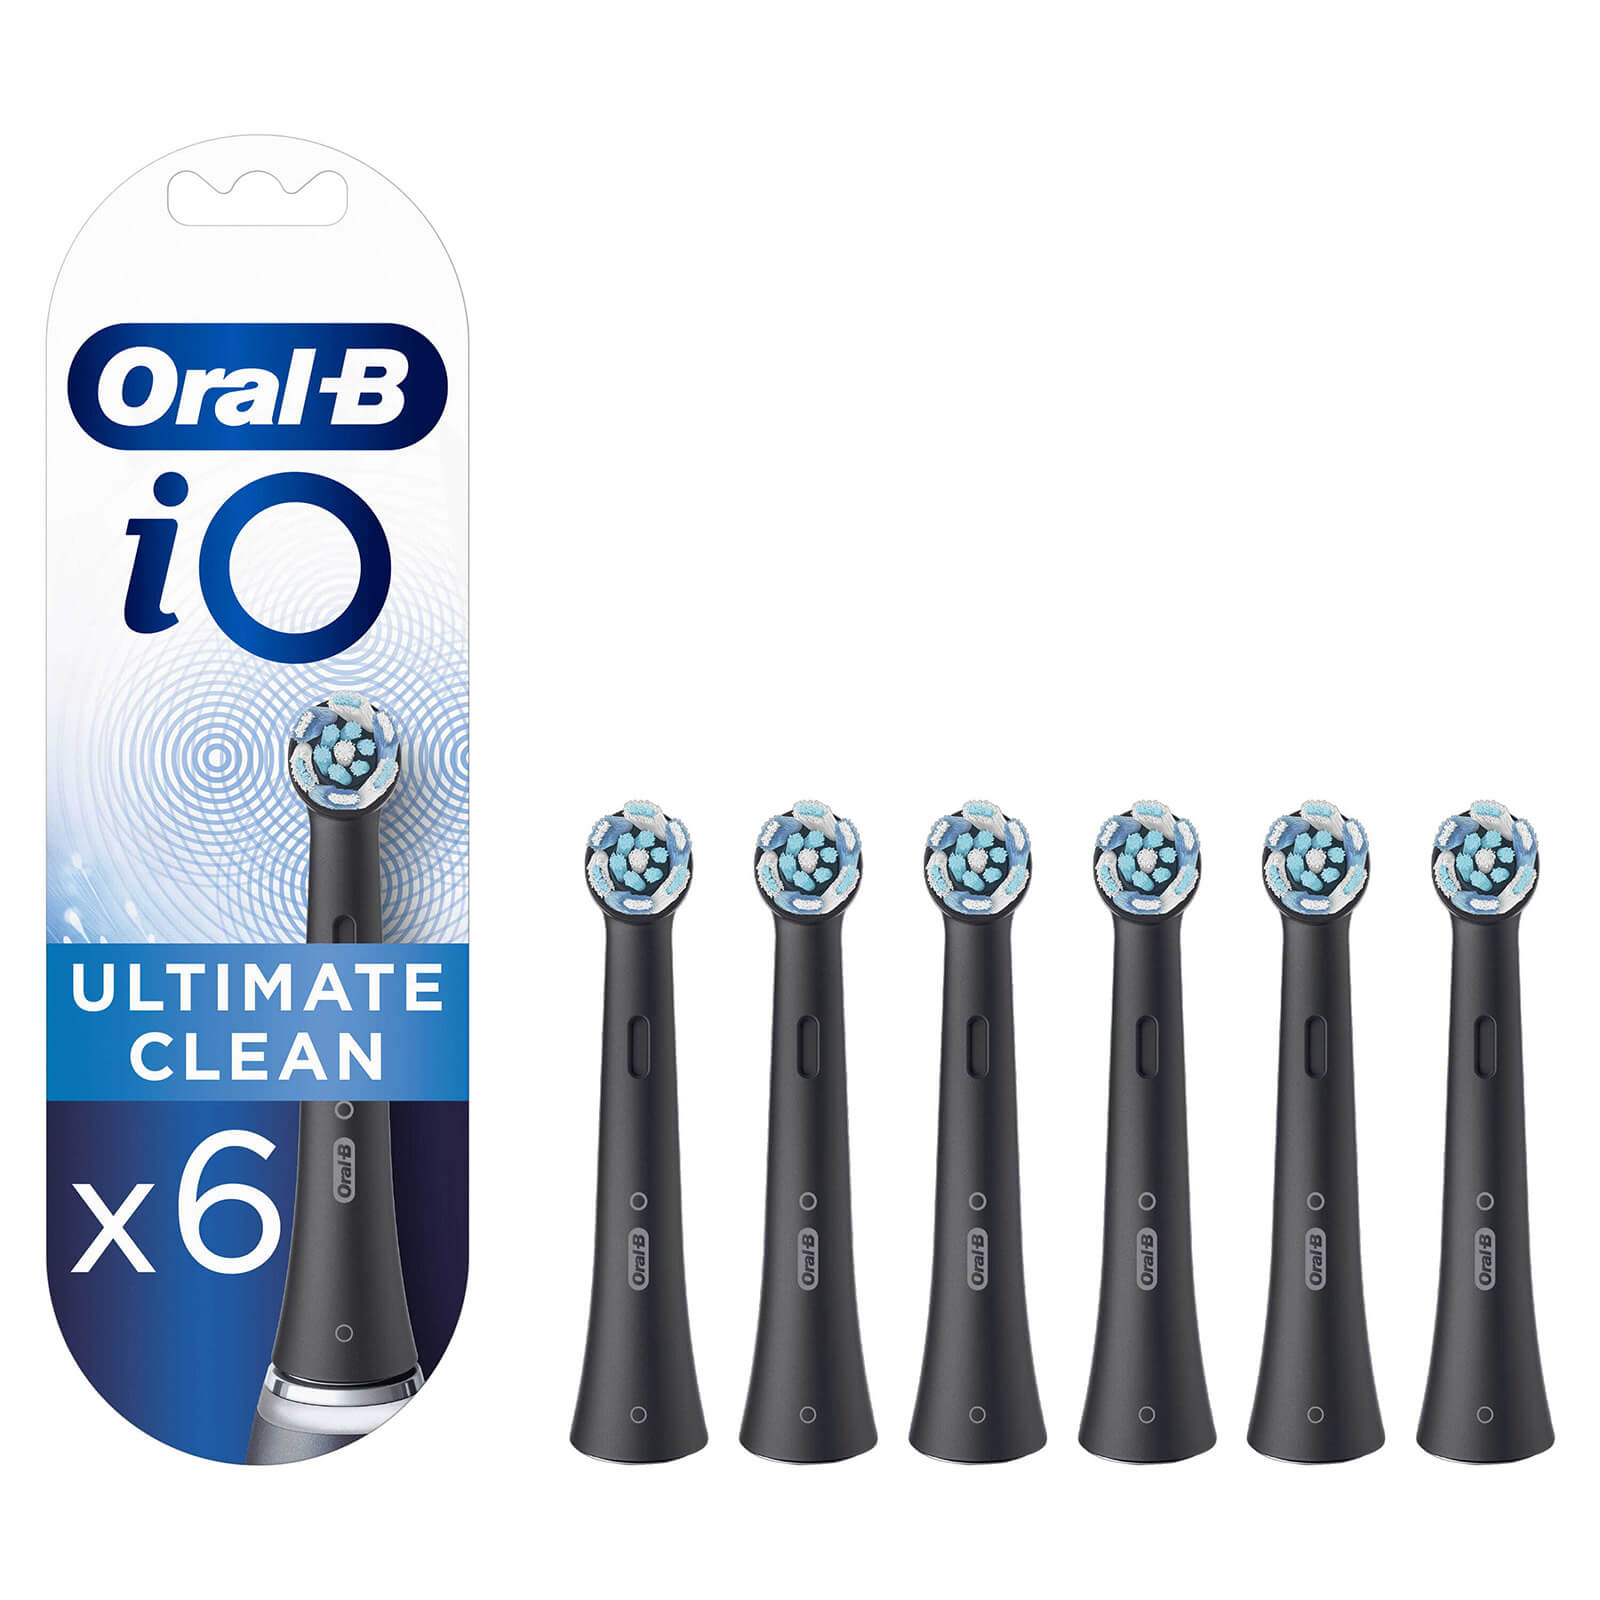 Oral B iO Ultimate Clean Black Toothbrush Heads - Pack of 6 Counts